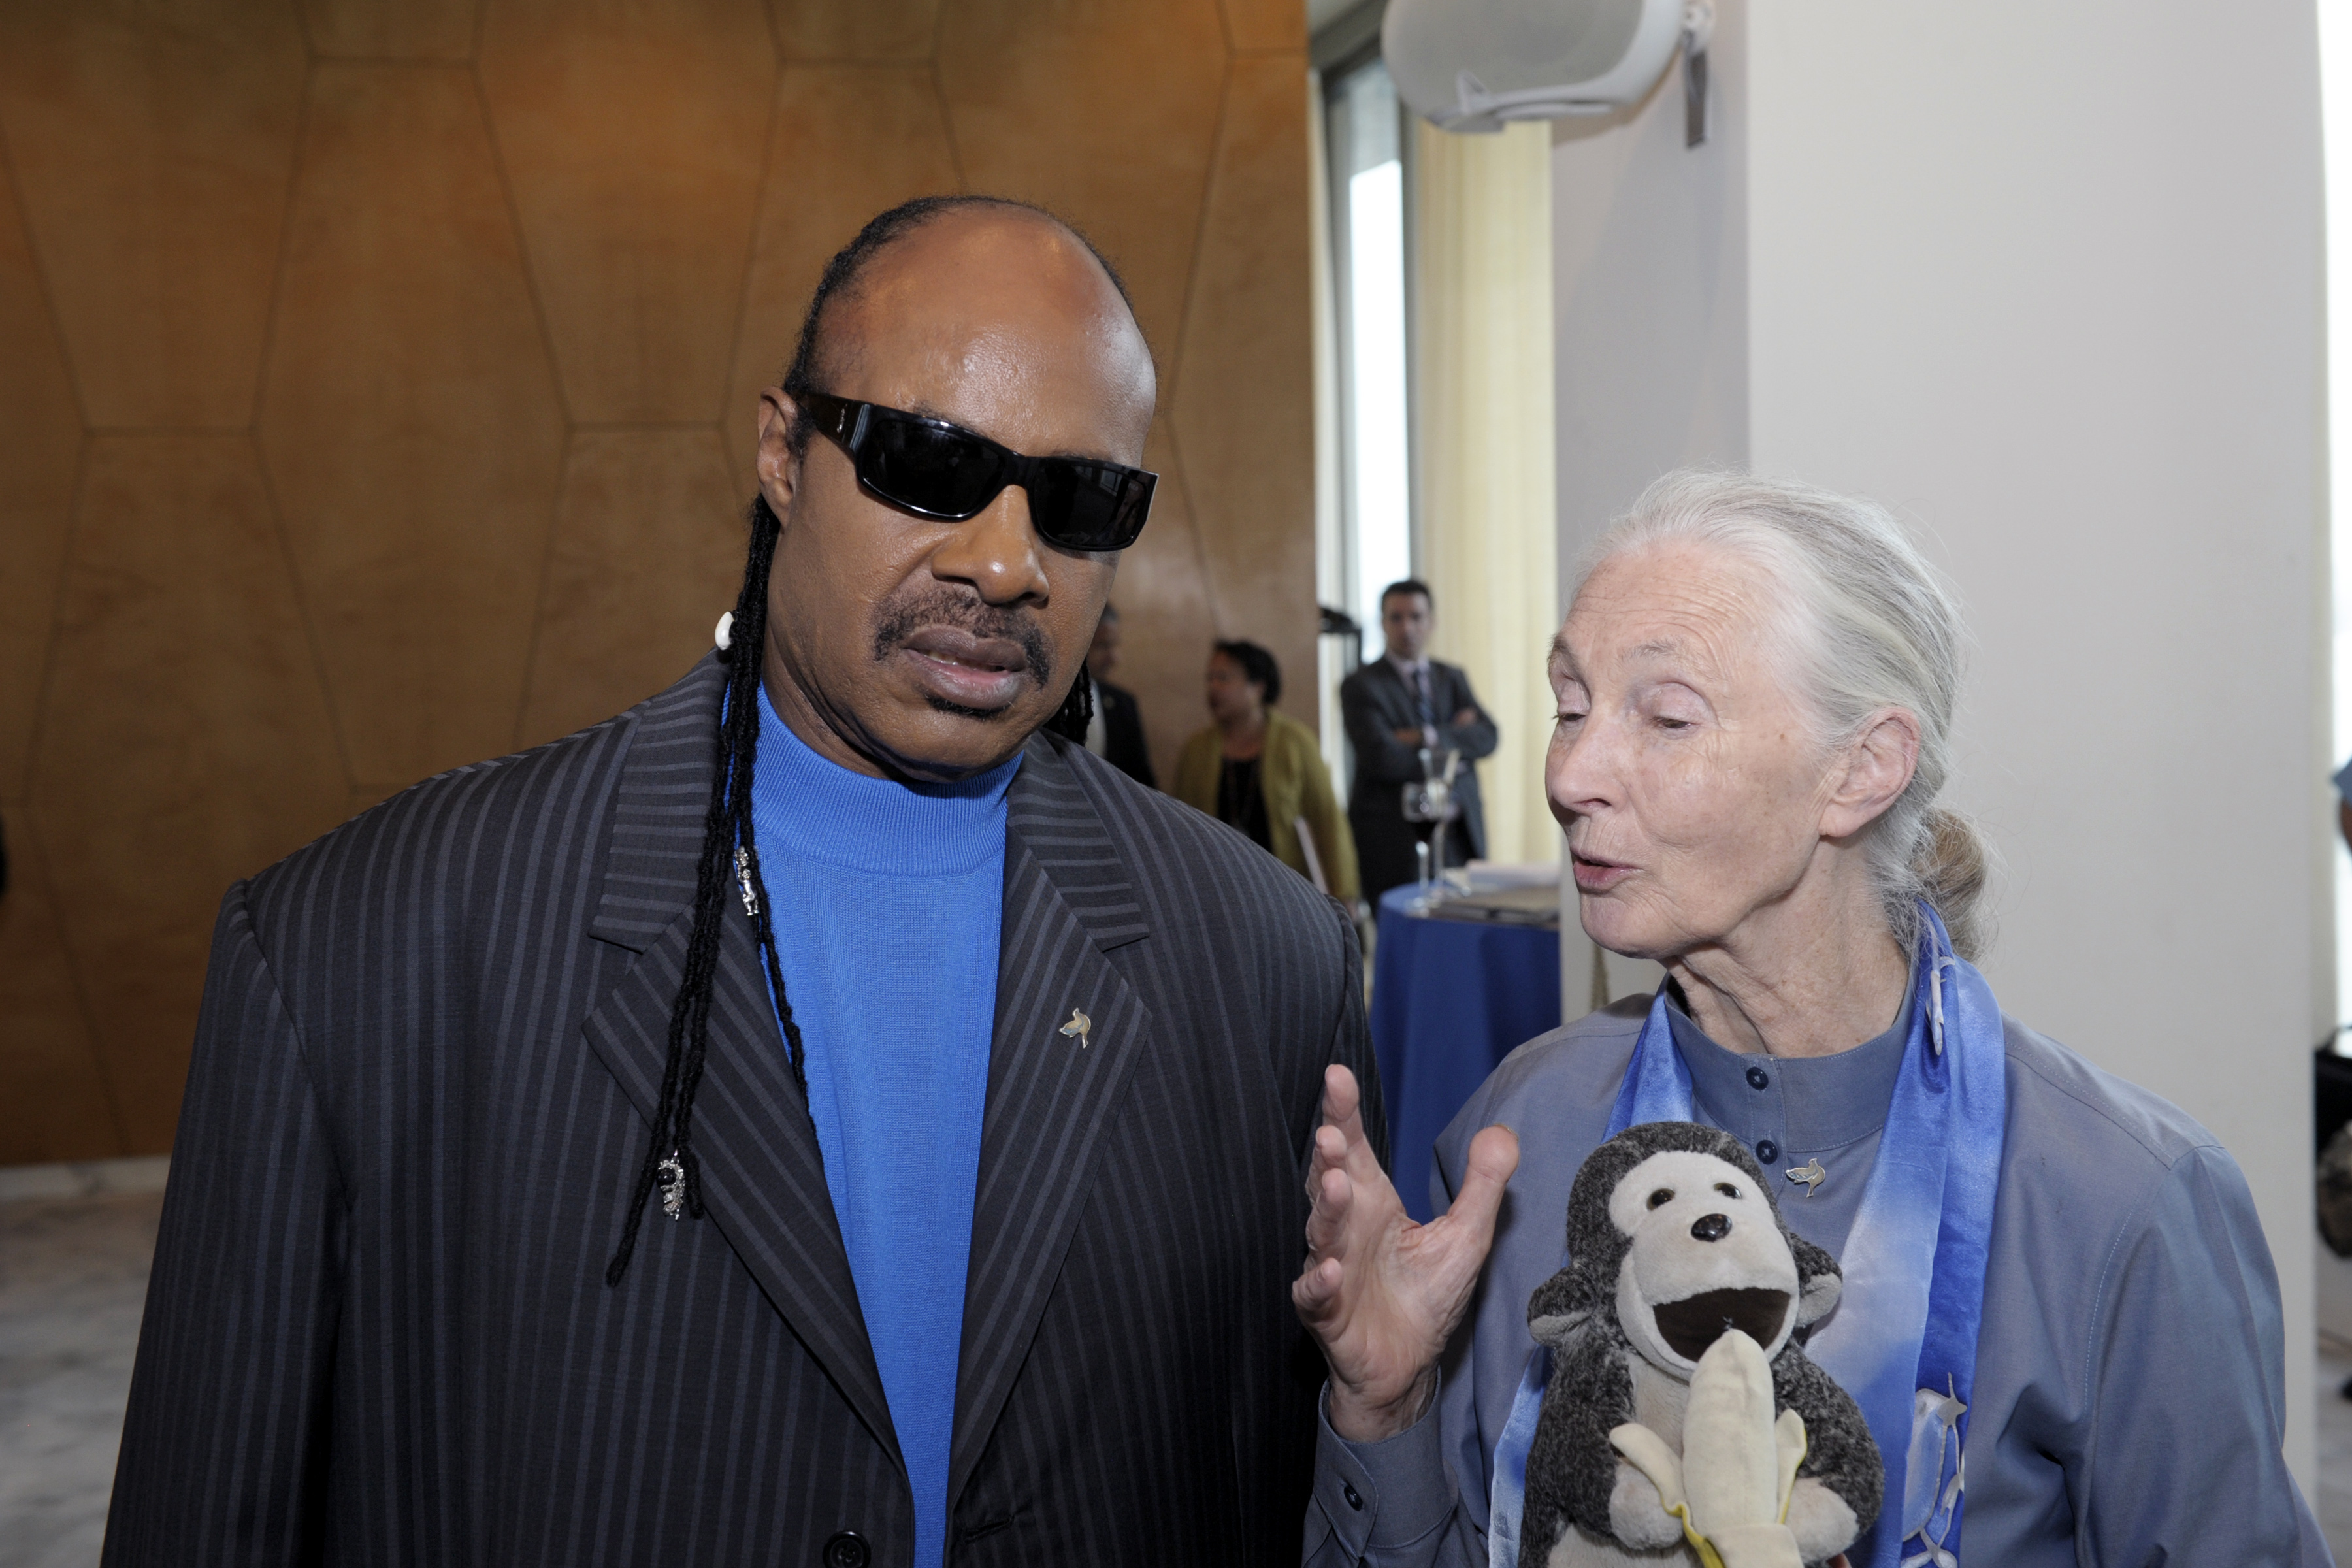 UN Messengers of Peace Stevie Wonder and Jane Goodall, chat at a luncheon hosted by former Secretary-General at UN Headquarters.15 September 2011. 51Թ, New York/UN Photo/Eskinder Debebe